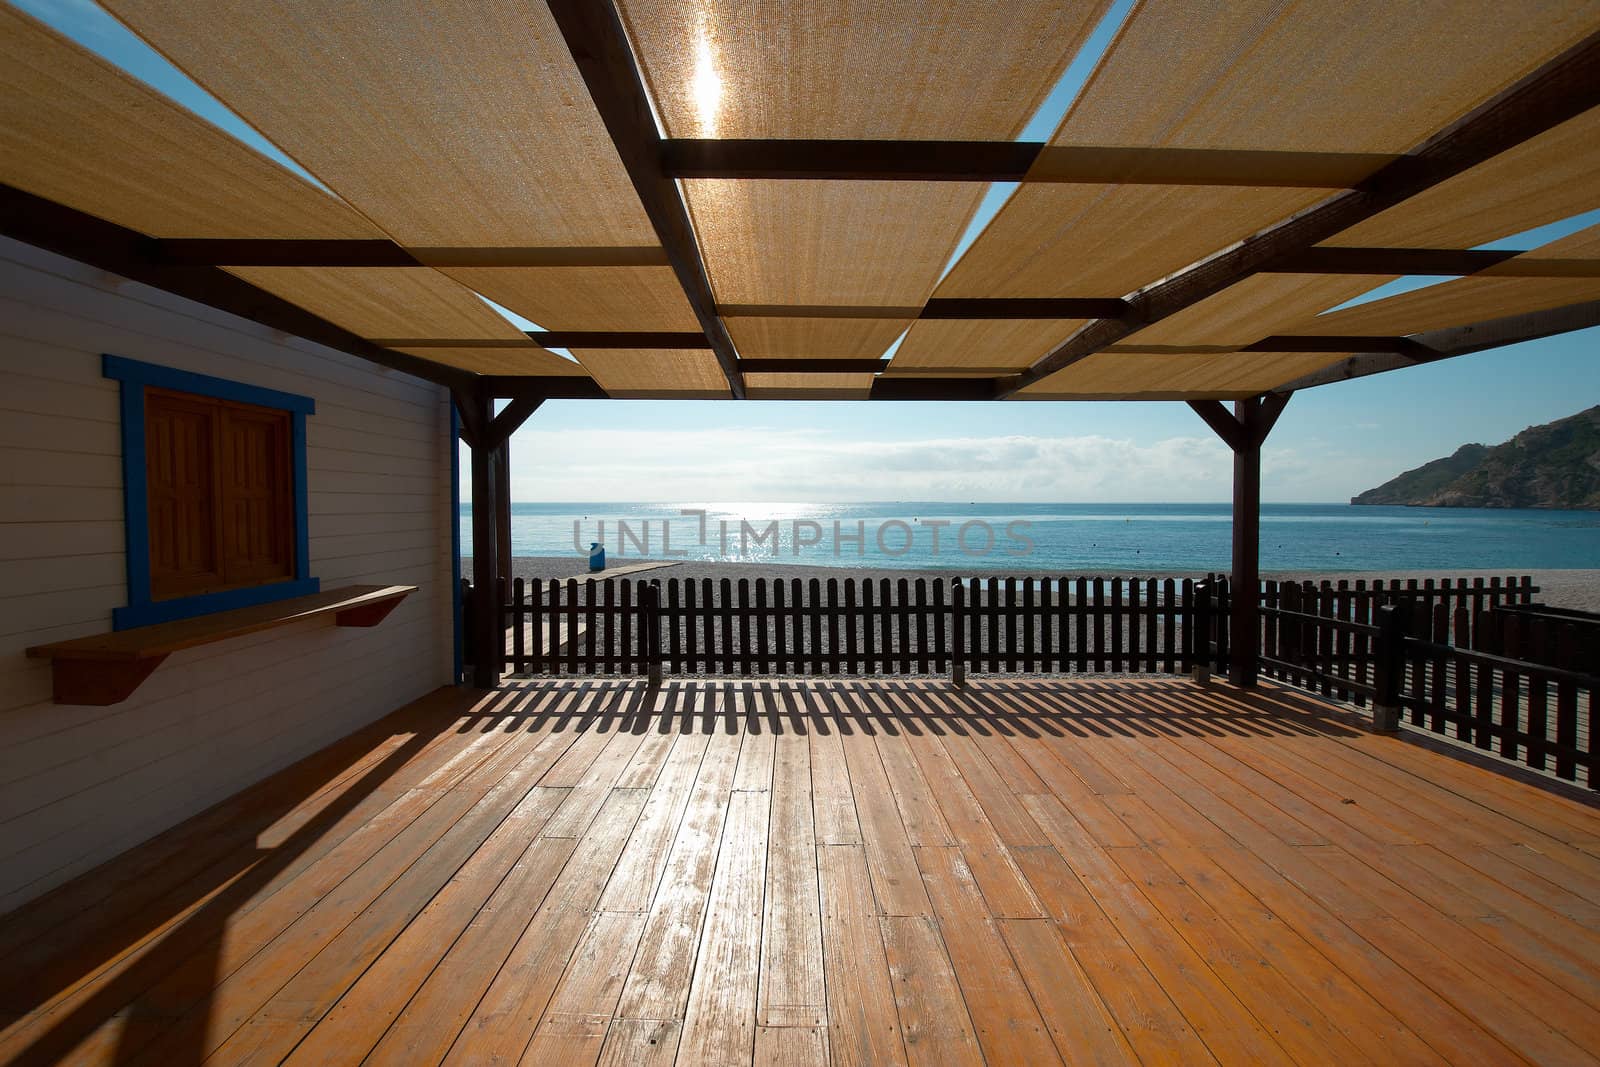 A wooden terrace with views on the sea